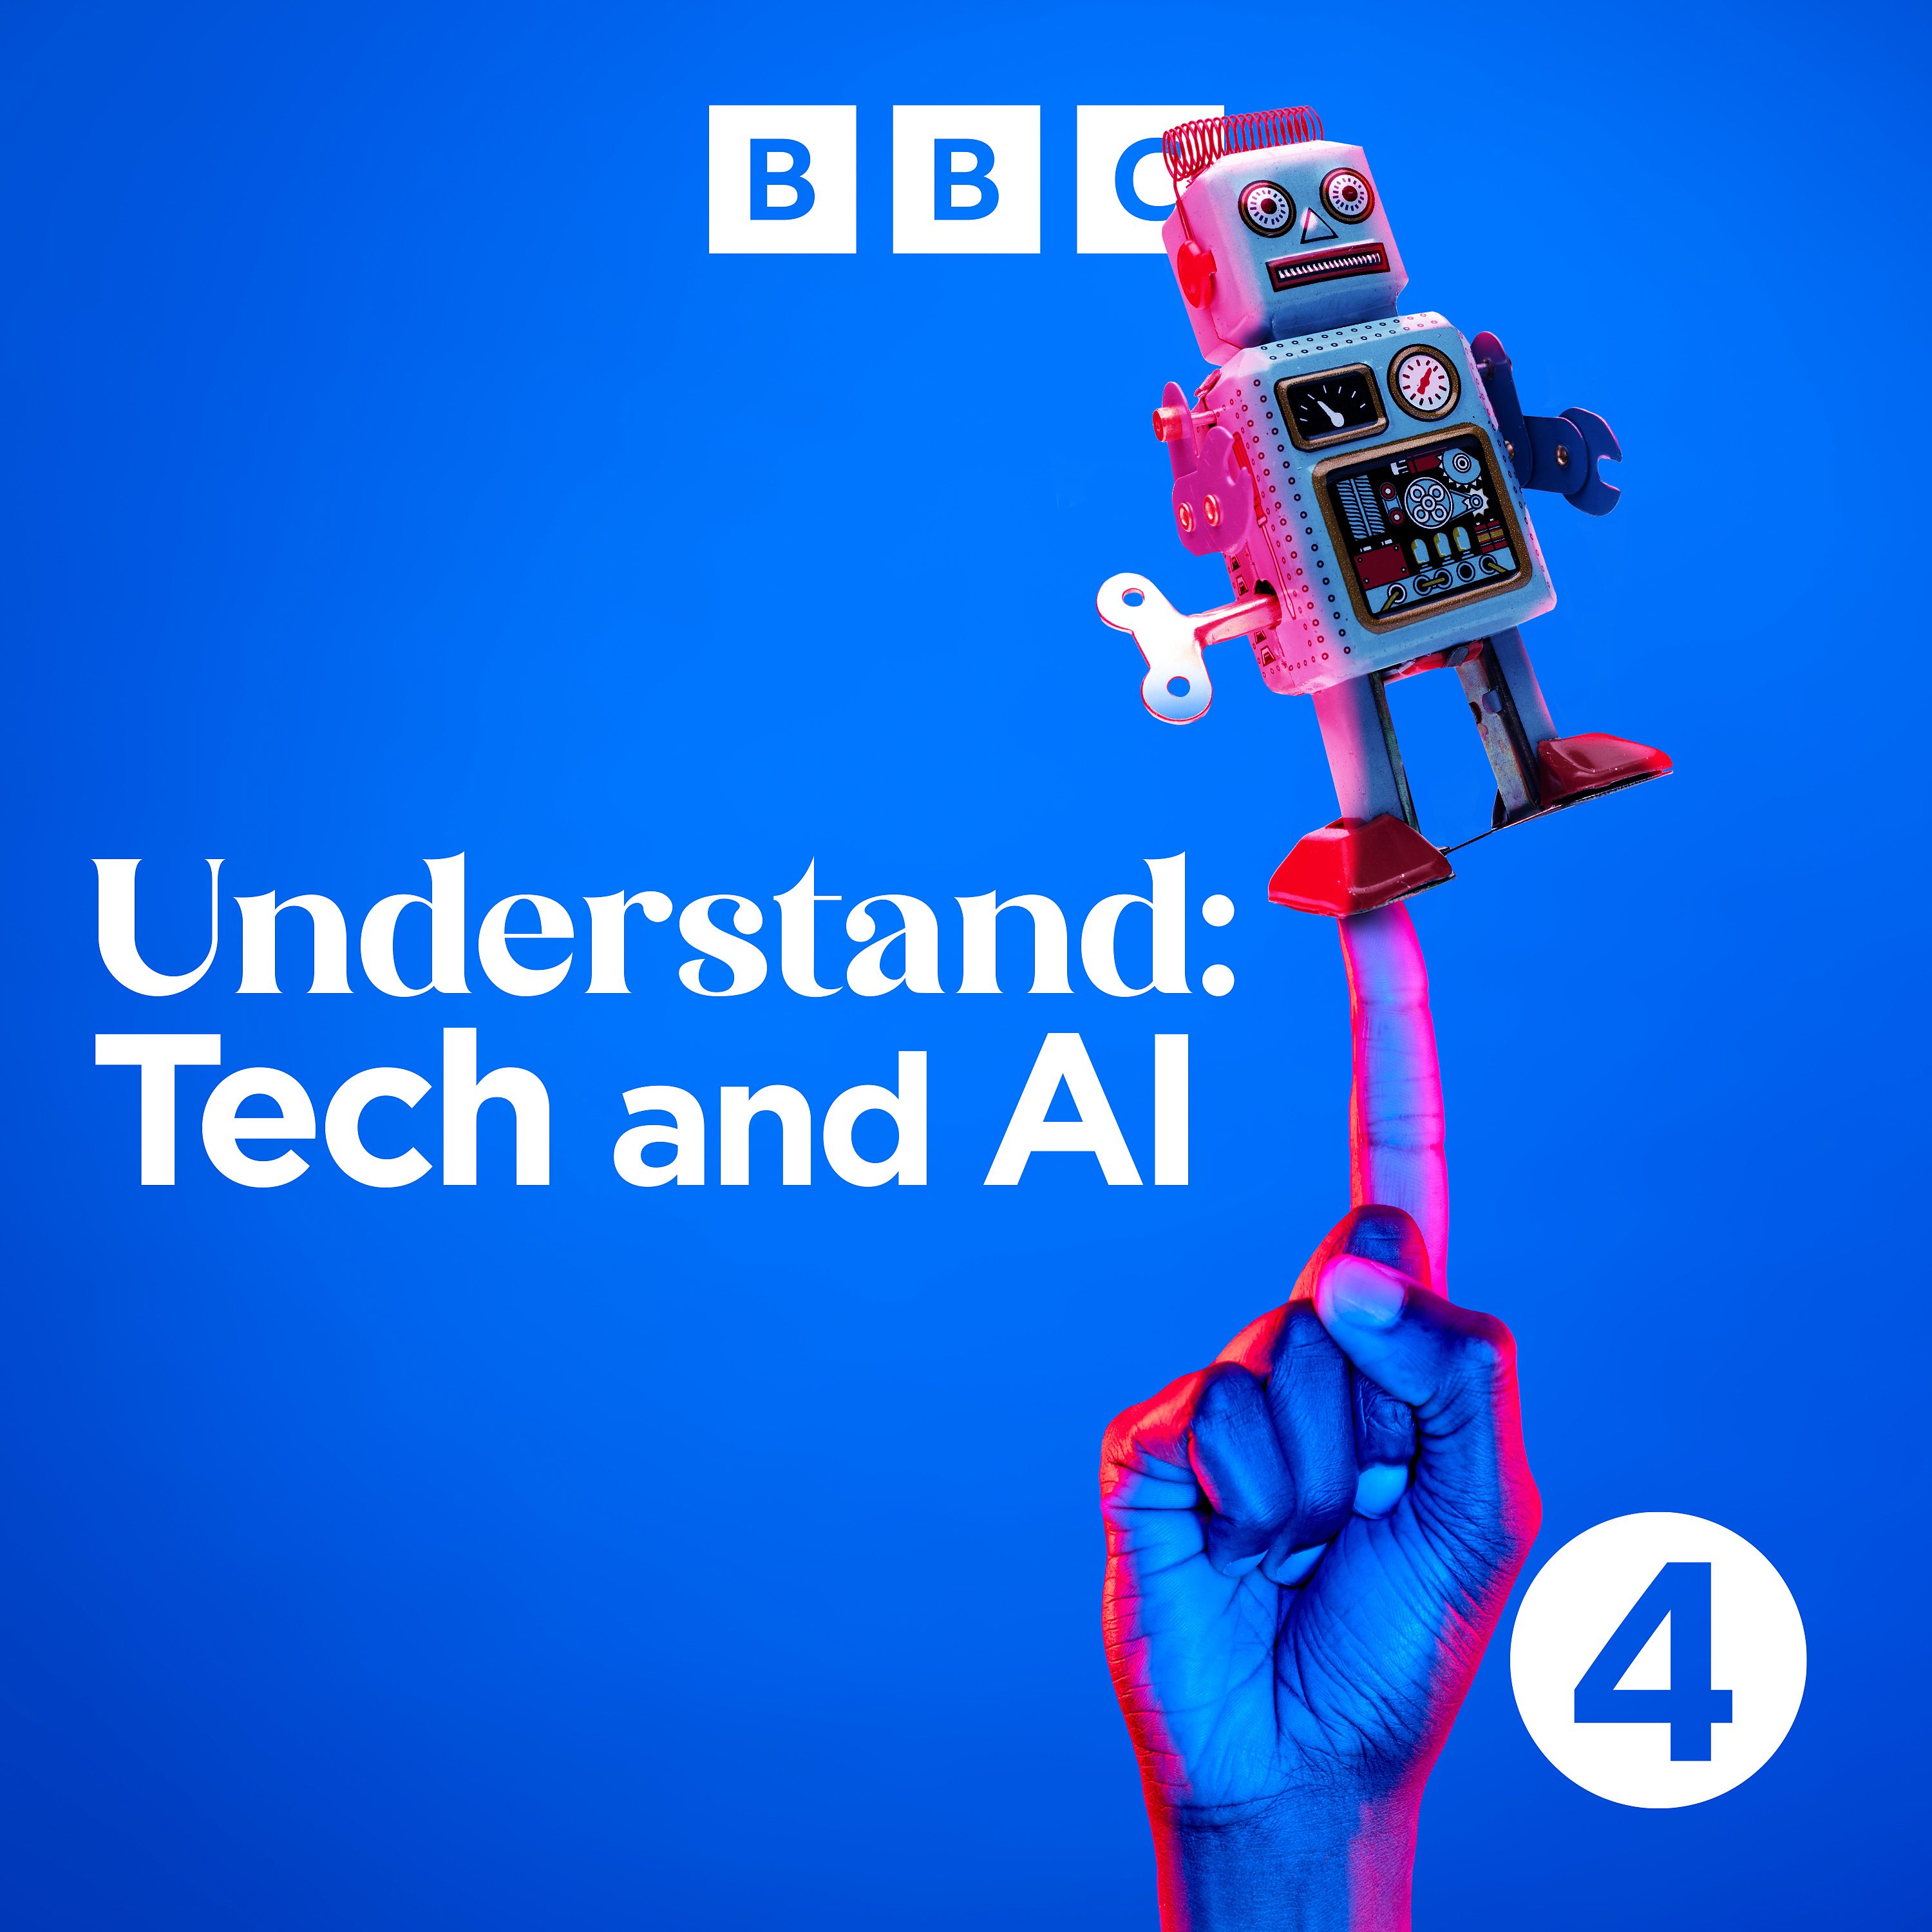 Welcome to Understand: Tech and AI